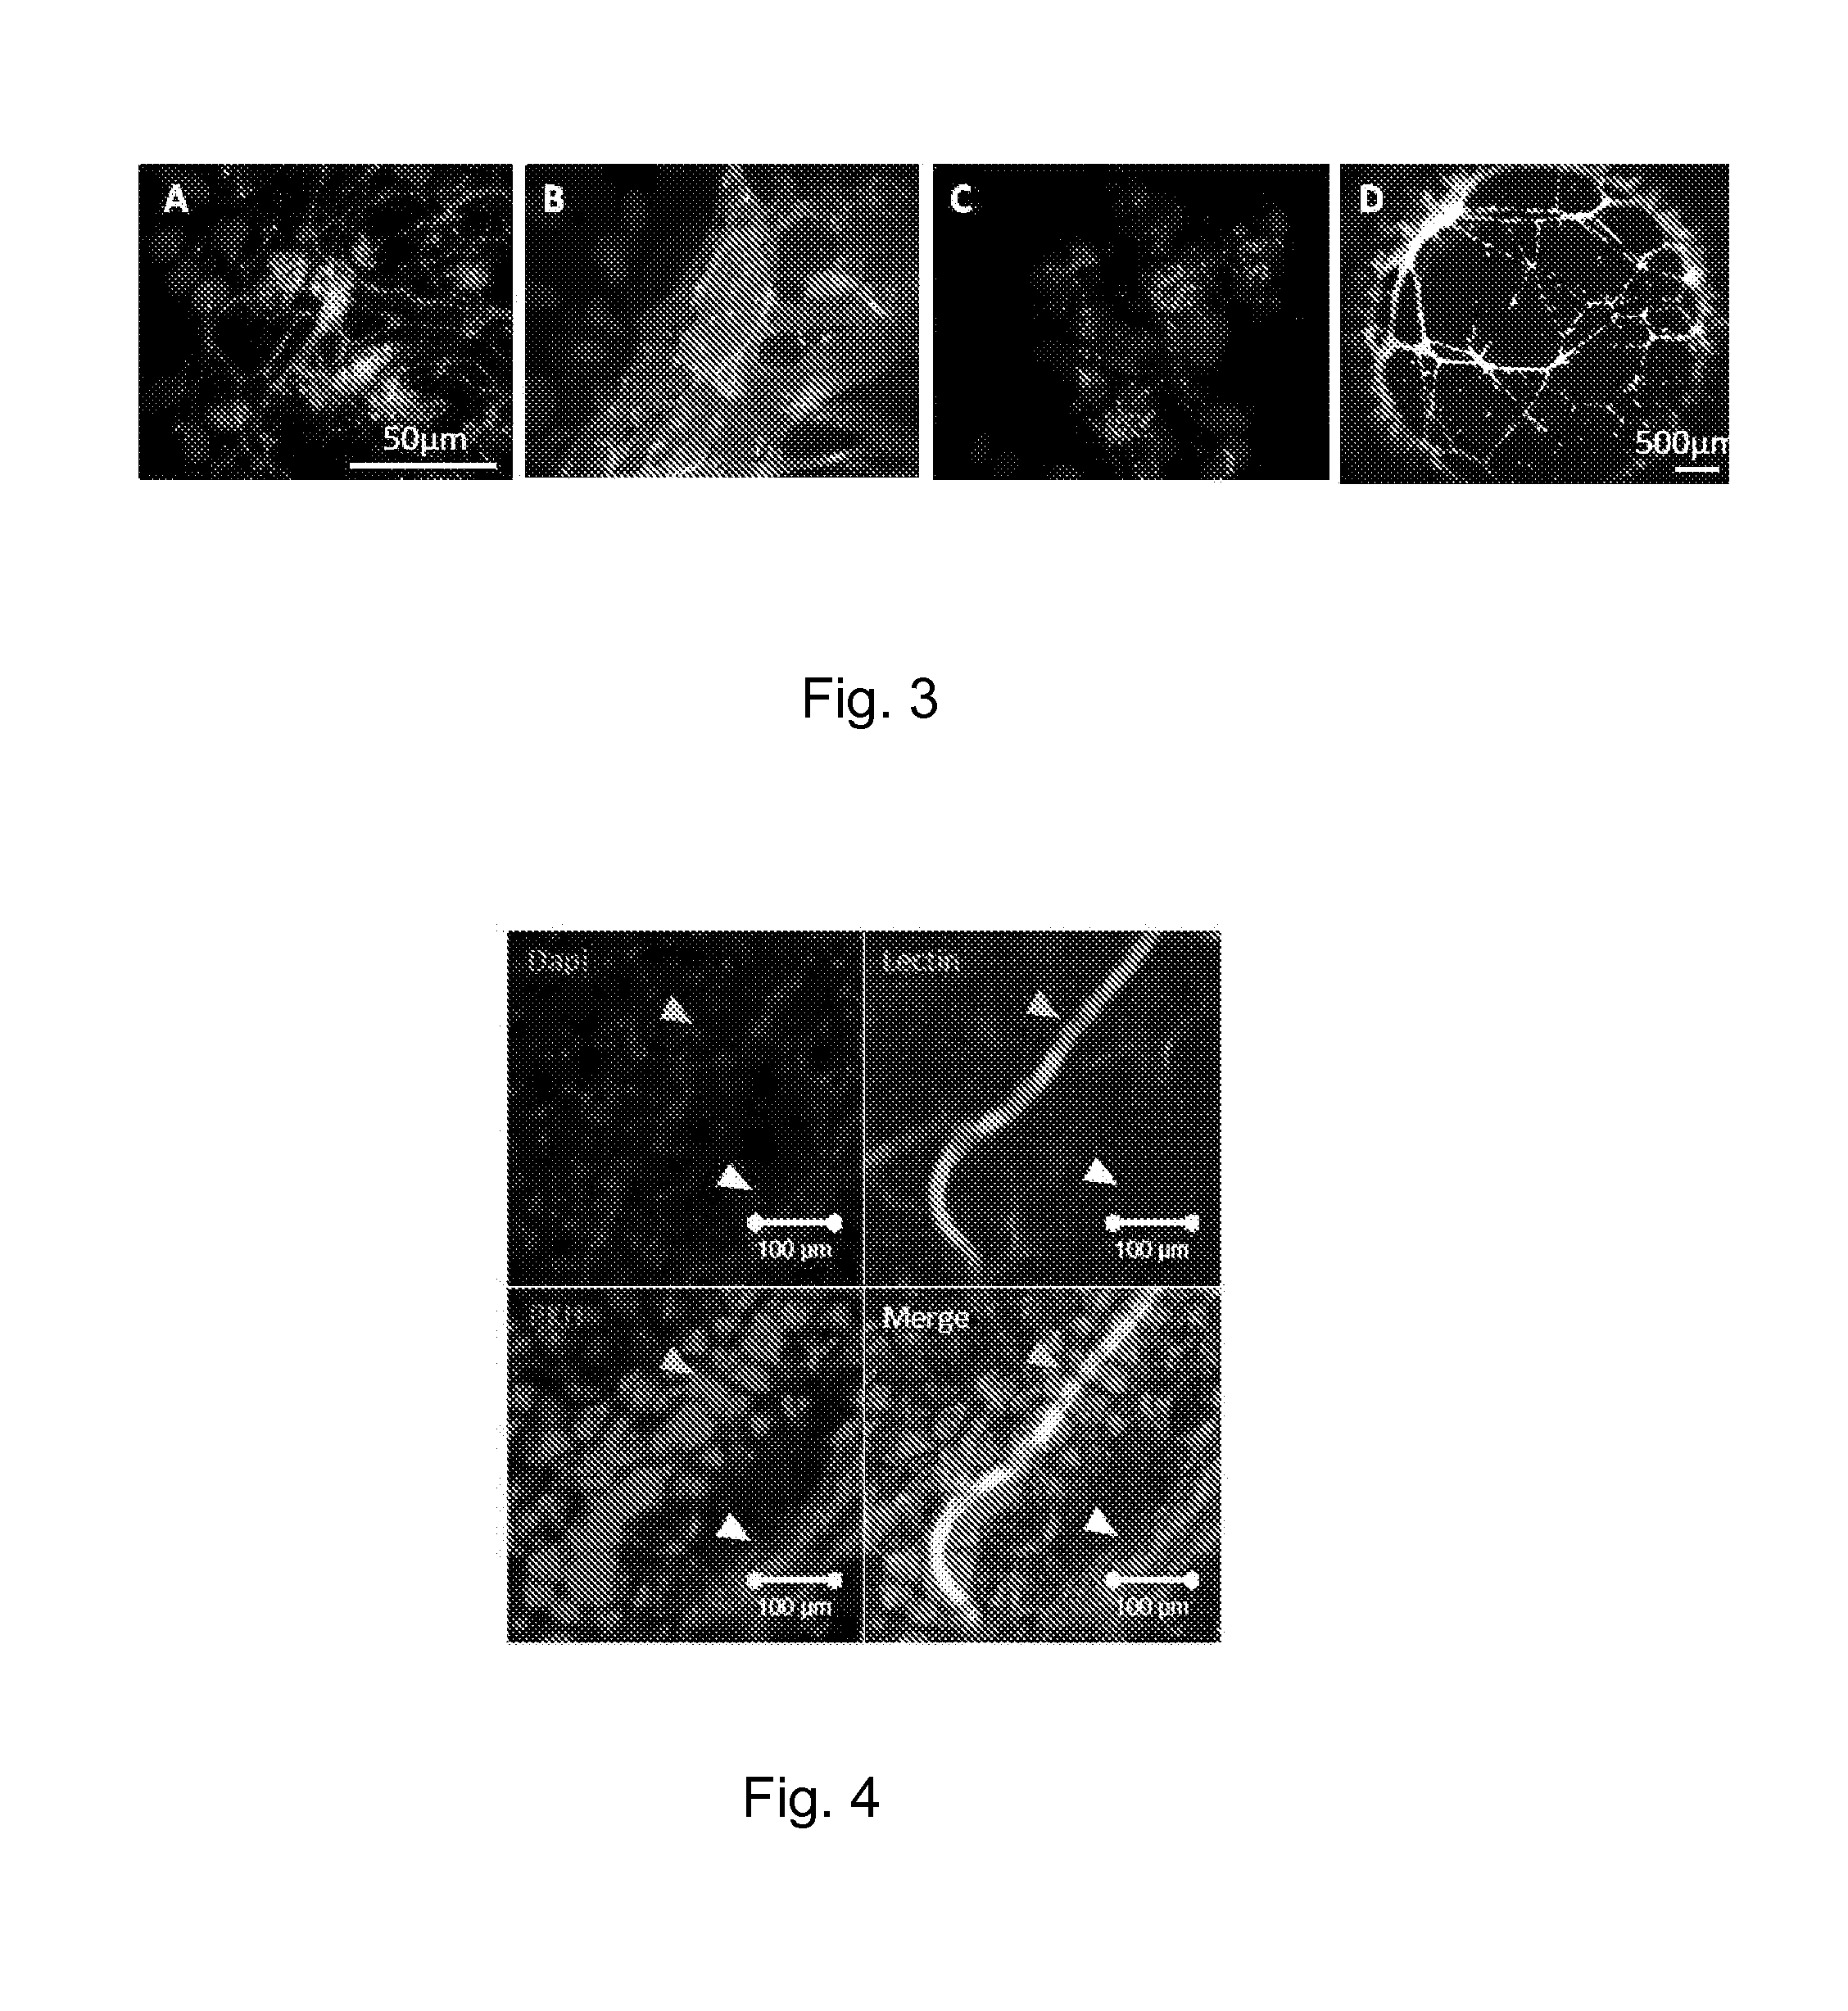 Method for guiding the derivation of endothelial cells from human pluripotent stem cells employing two-dimensional, feeder-free differentiation